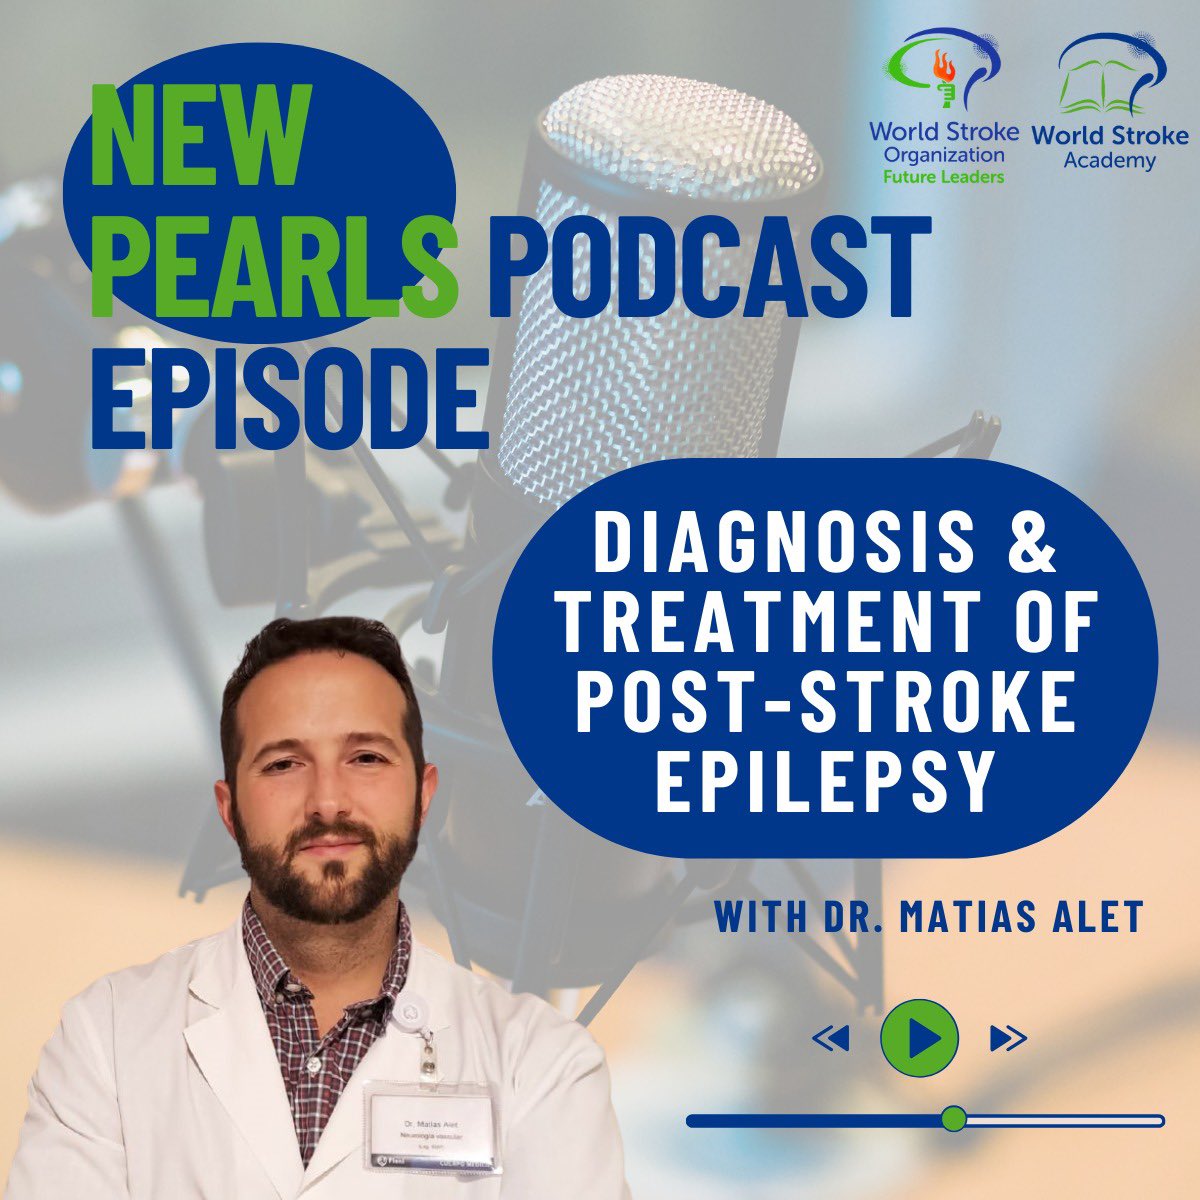 🫵 We don’t get tired of delivering high-quality #stroke #education 🎙️You can now listen our new #PearlPodcast featuring Dr @AletMatias from @WorldStrokeOrg Future Leaders Program, discussing post-stroke #epilepsy concepts 🎧this & other episodes here👇 world-stroke-academy.org/podcasts/